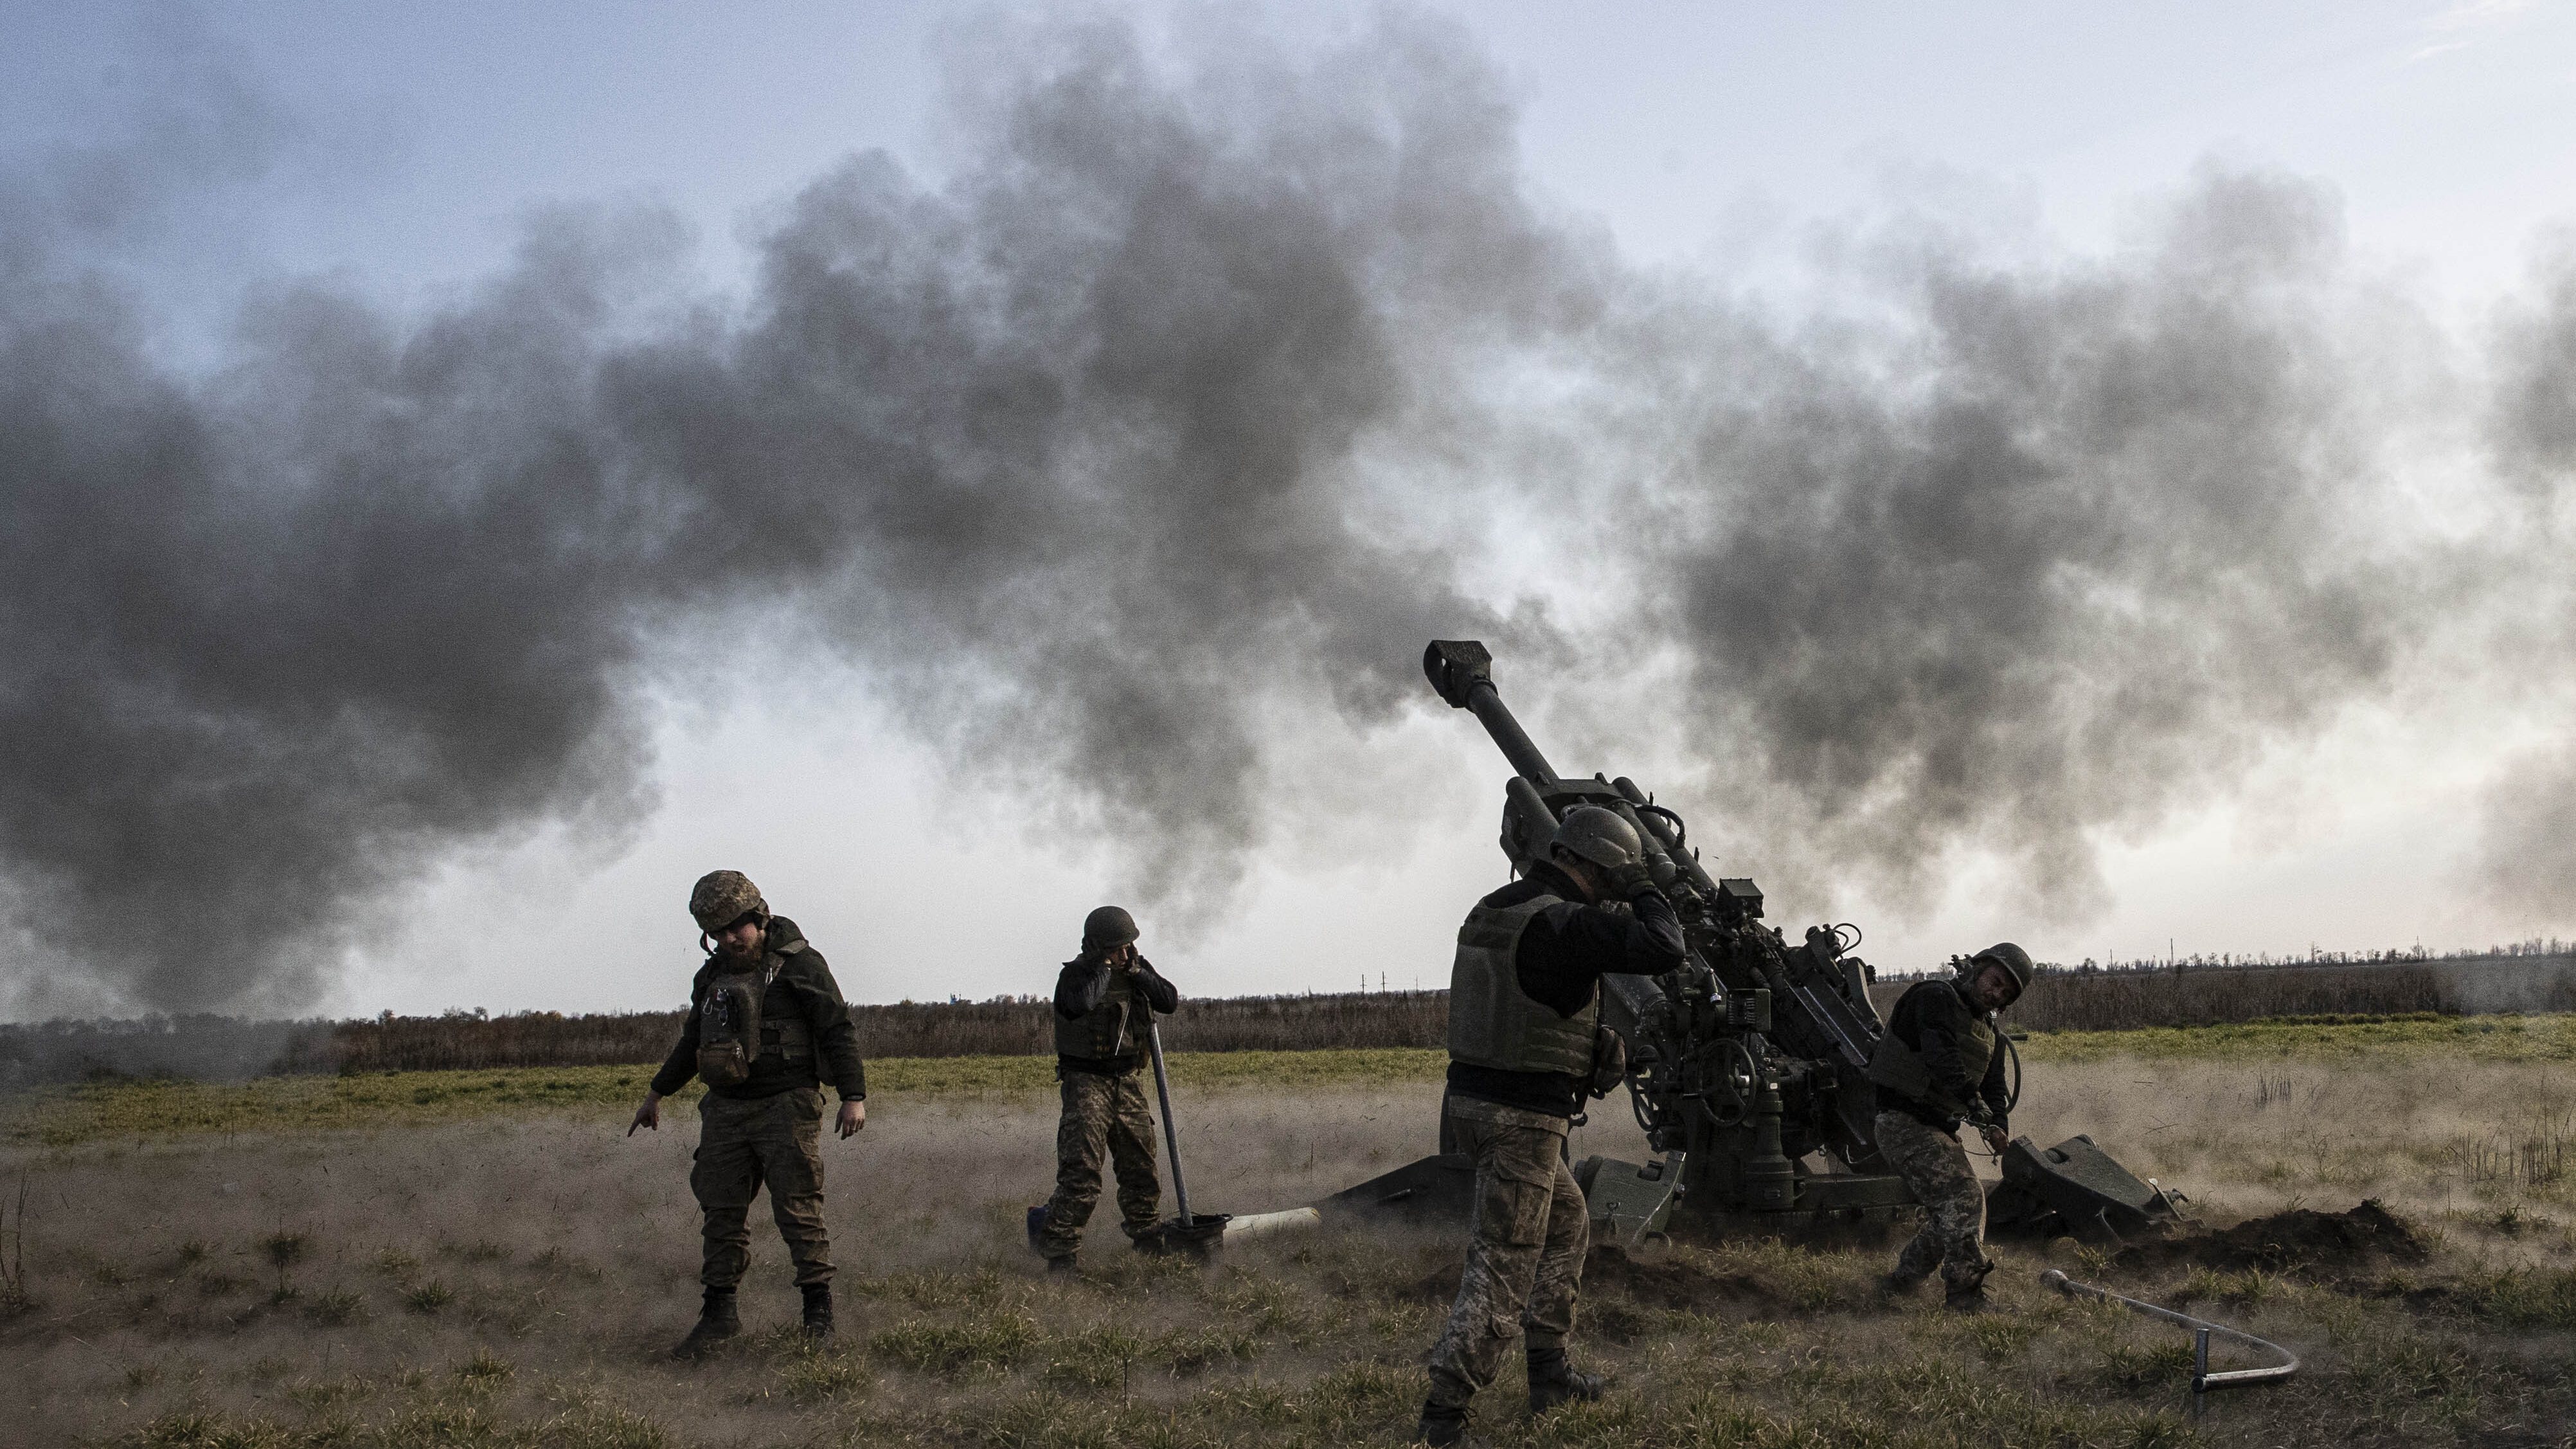 Artillery units stationed on the Kherson fronts provide intense fire support to the Ukrainian army